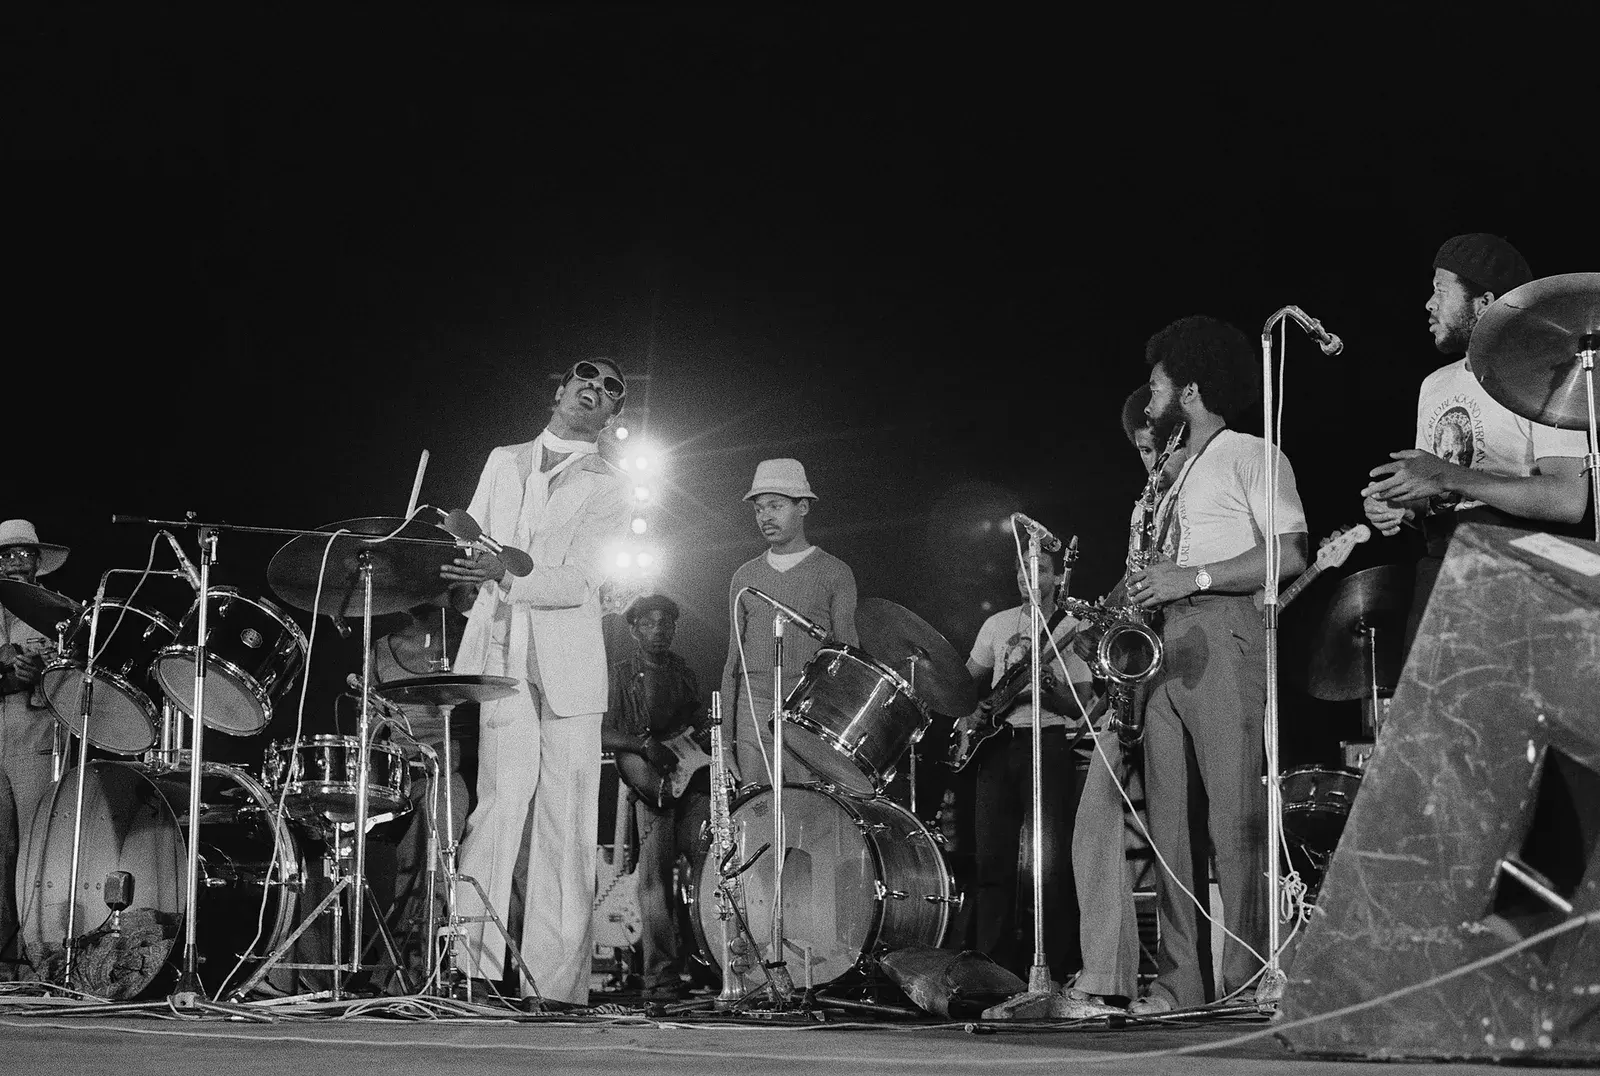 Stevie Wonder performs on the drums at FESTAC '77. Copyright: Marilyn Nance / Artists Rights Society (ARS), New York.